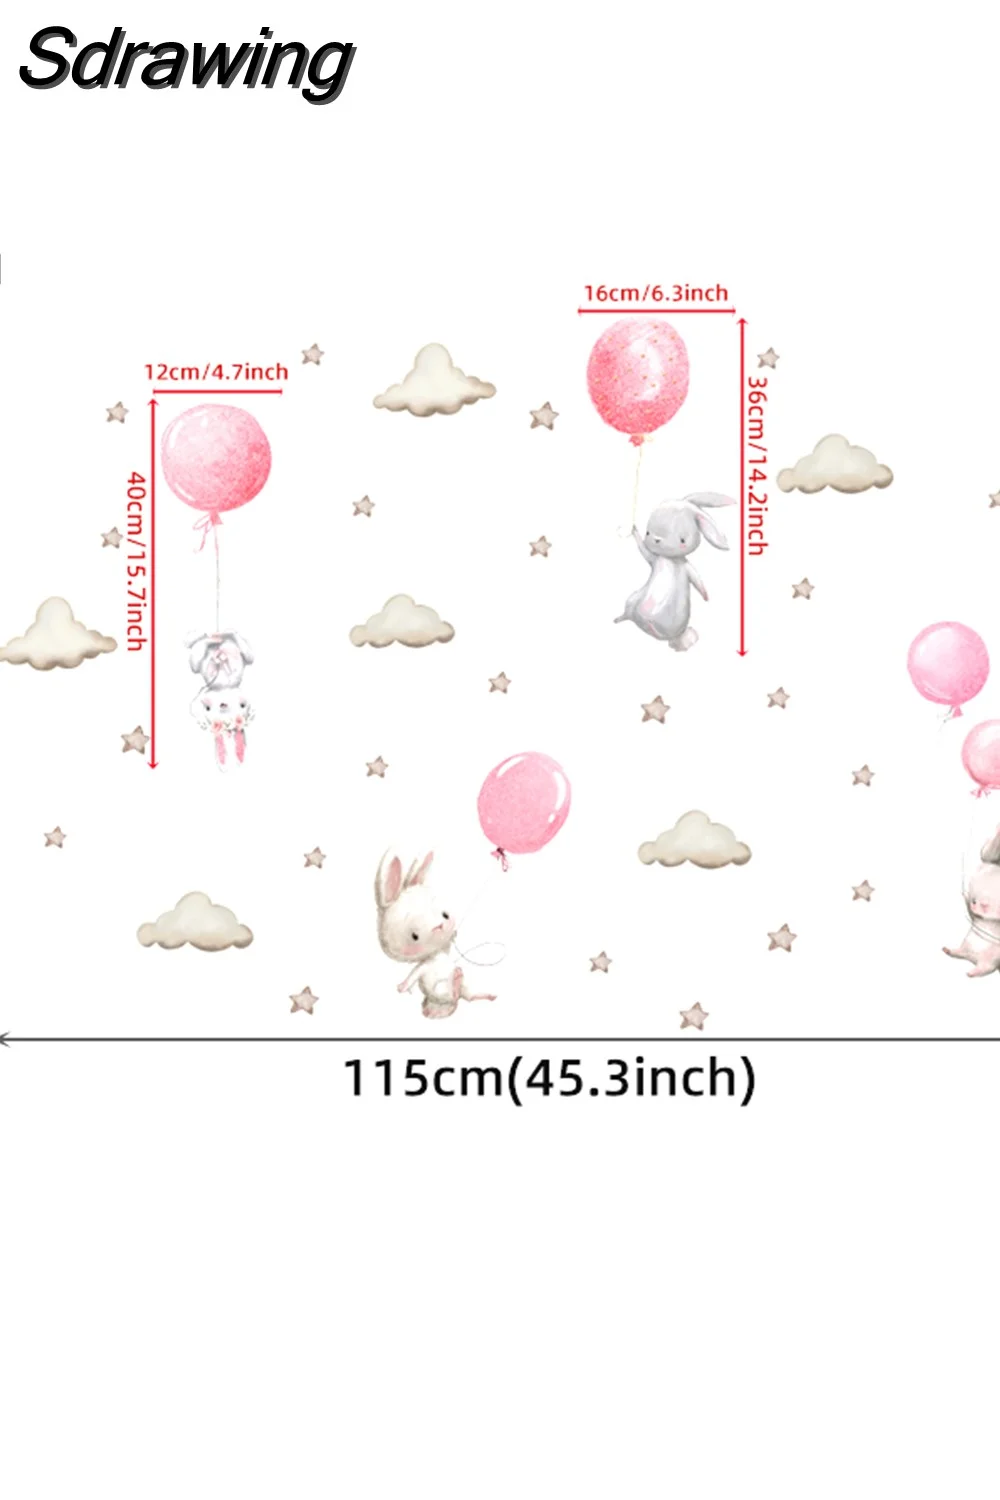 Sdrawing Watercolor Bunnies Wall Stickers for Kids Room Colorful Balloons Animals Home Decor Friendly Rabbits Baby Bed Decoration